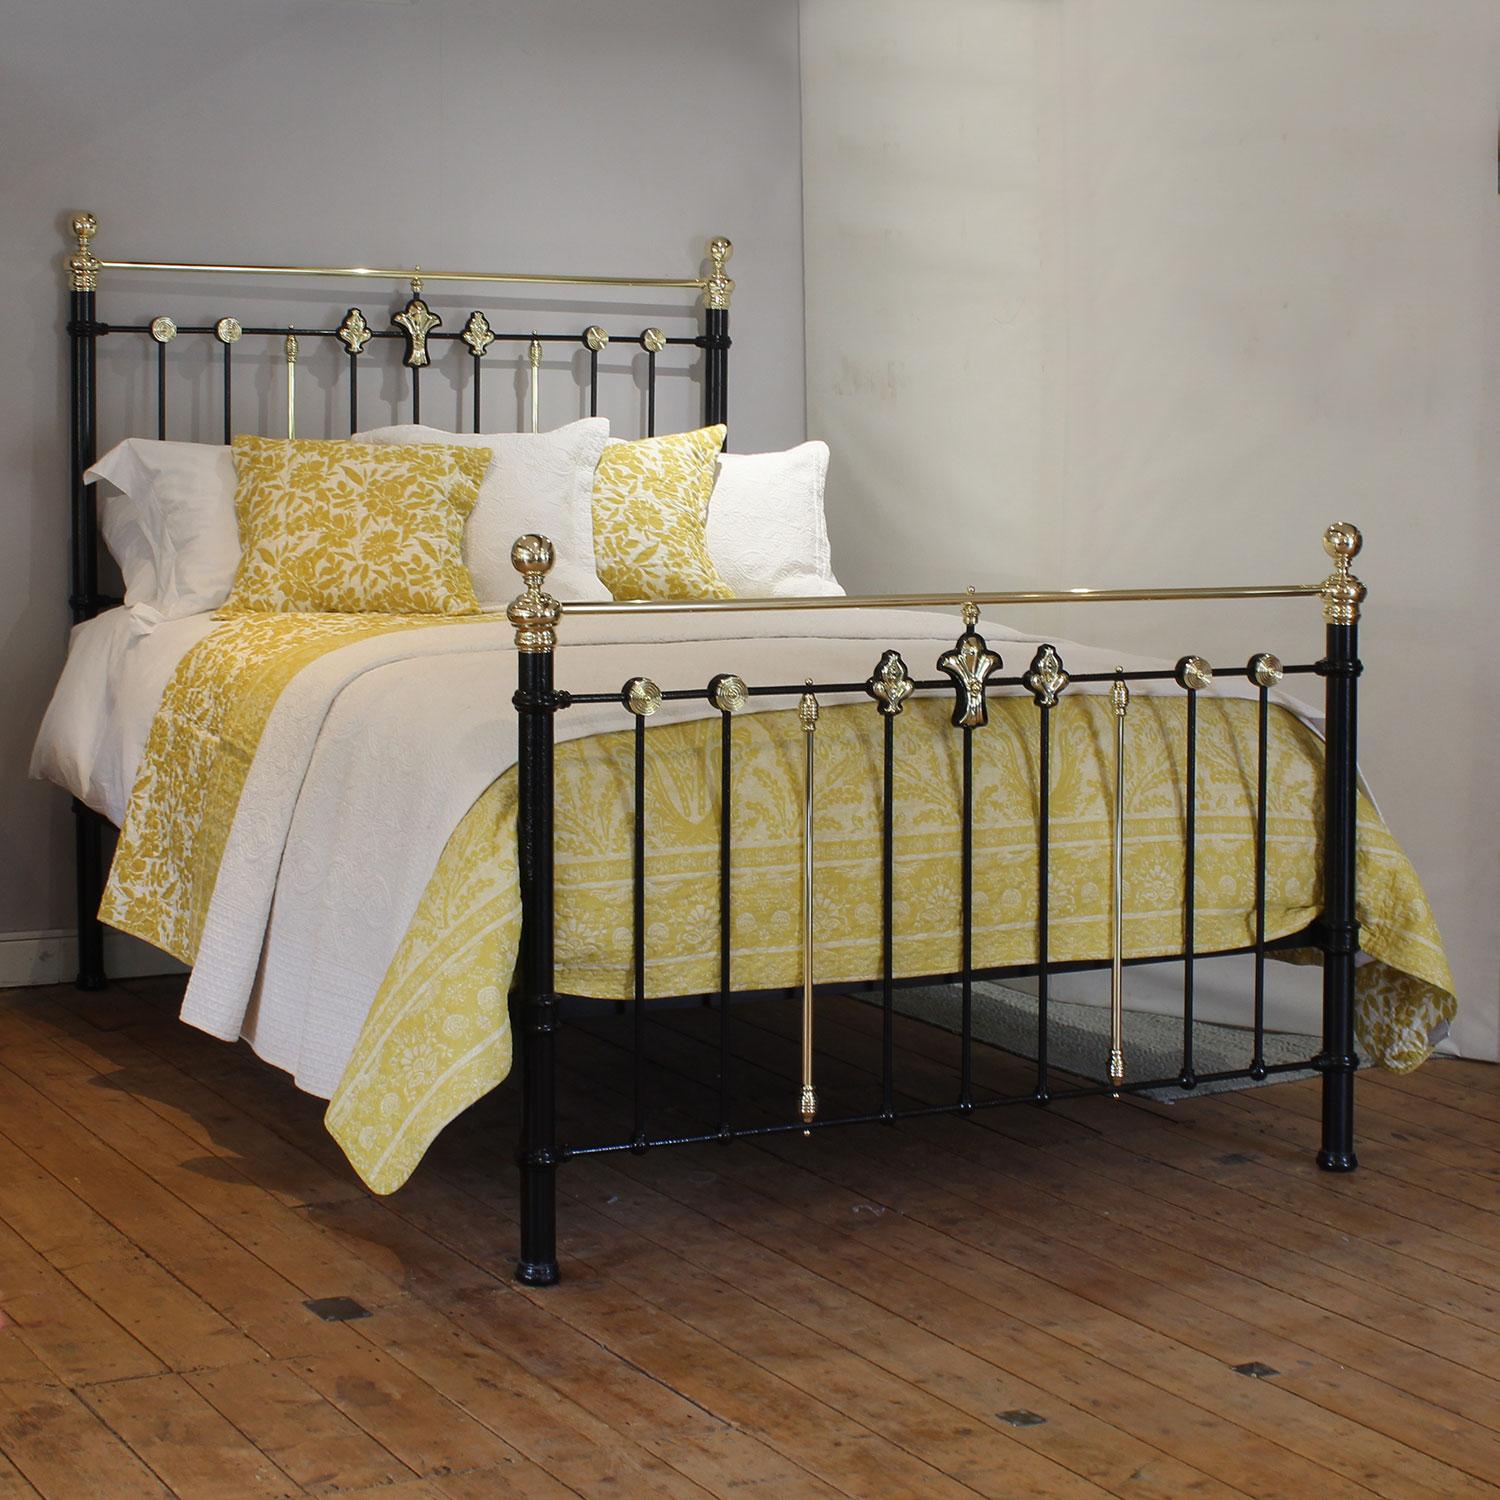 A superb cast iron antique bed finished in black with decorative Art Nouveau rosettes in head and foot panels.

This bed accepts a UK king size or US queen size (5ft, 60in or 150cm wide) base and mattress set.

The price includes a standard firm bed